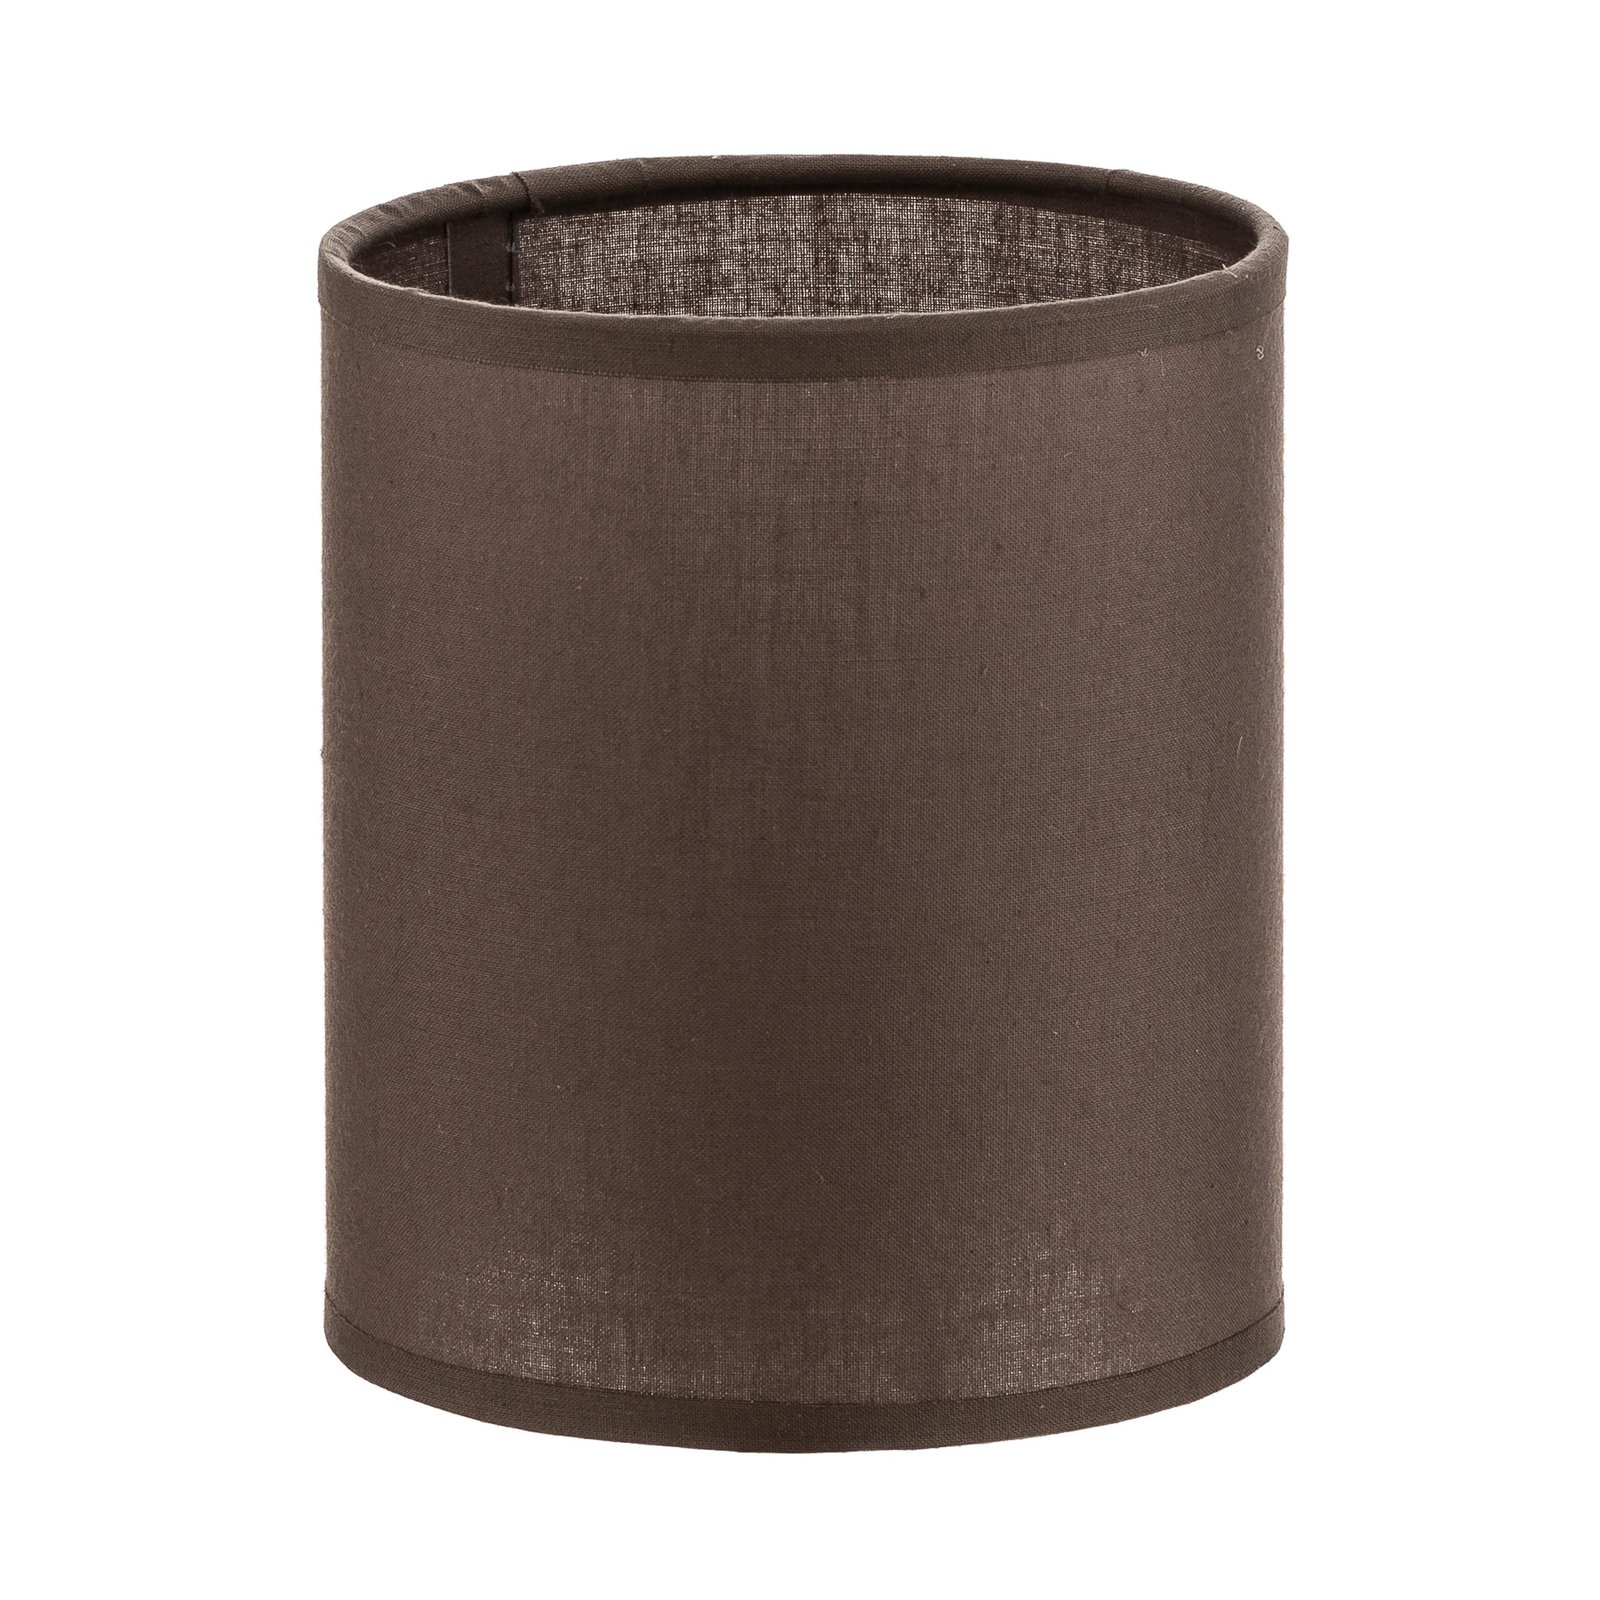 Roller lampshade earth brown Ø 13 cm, height 15 cm